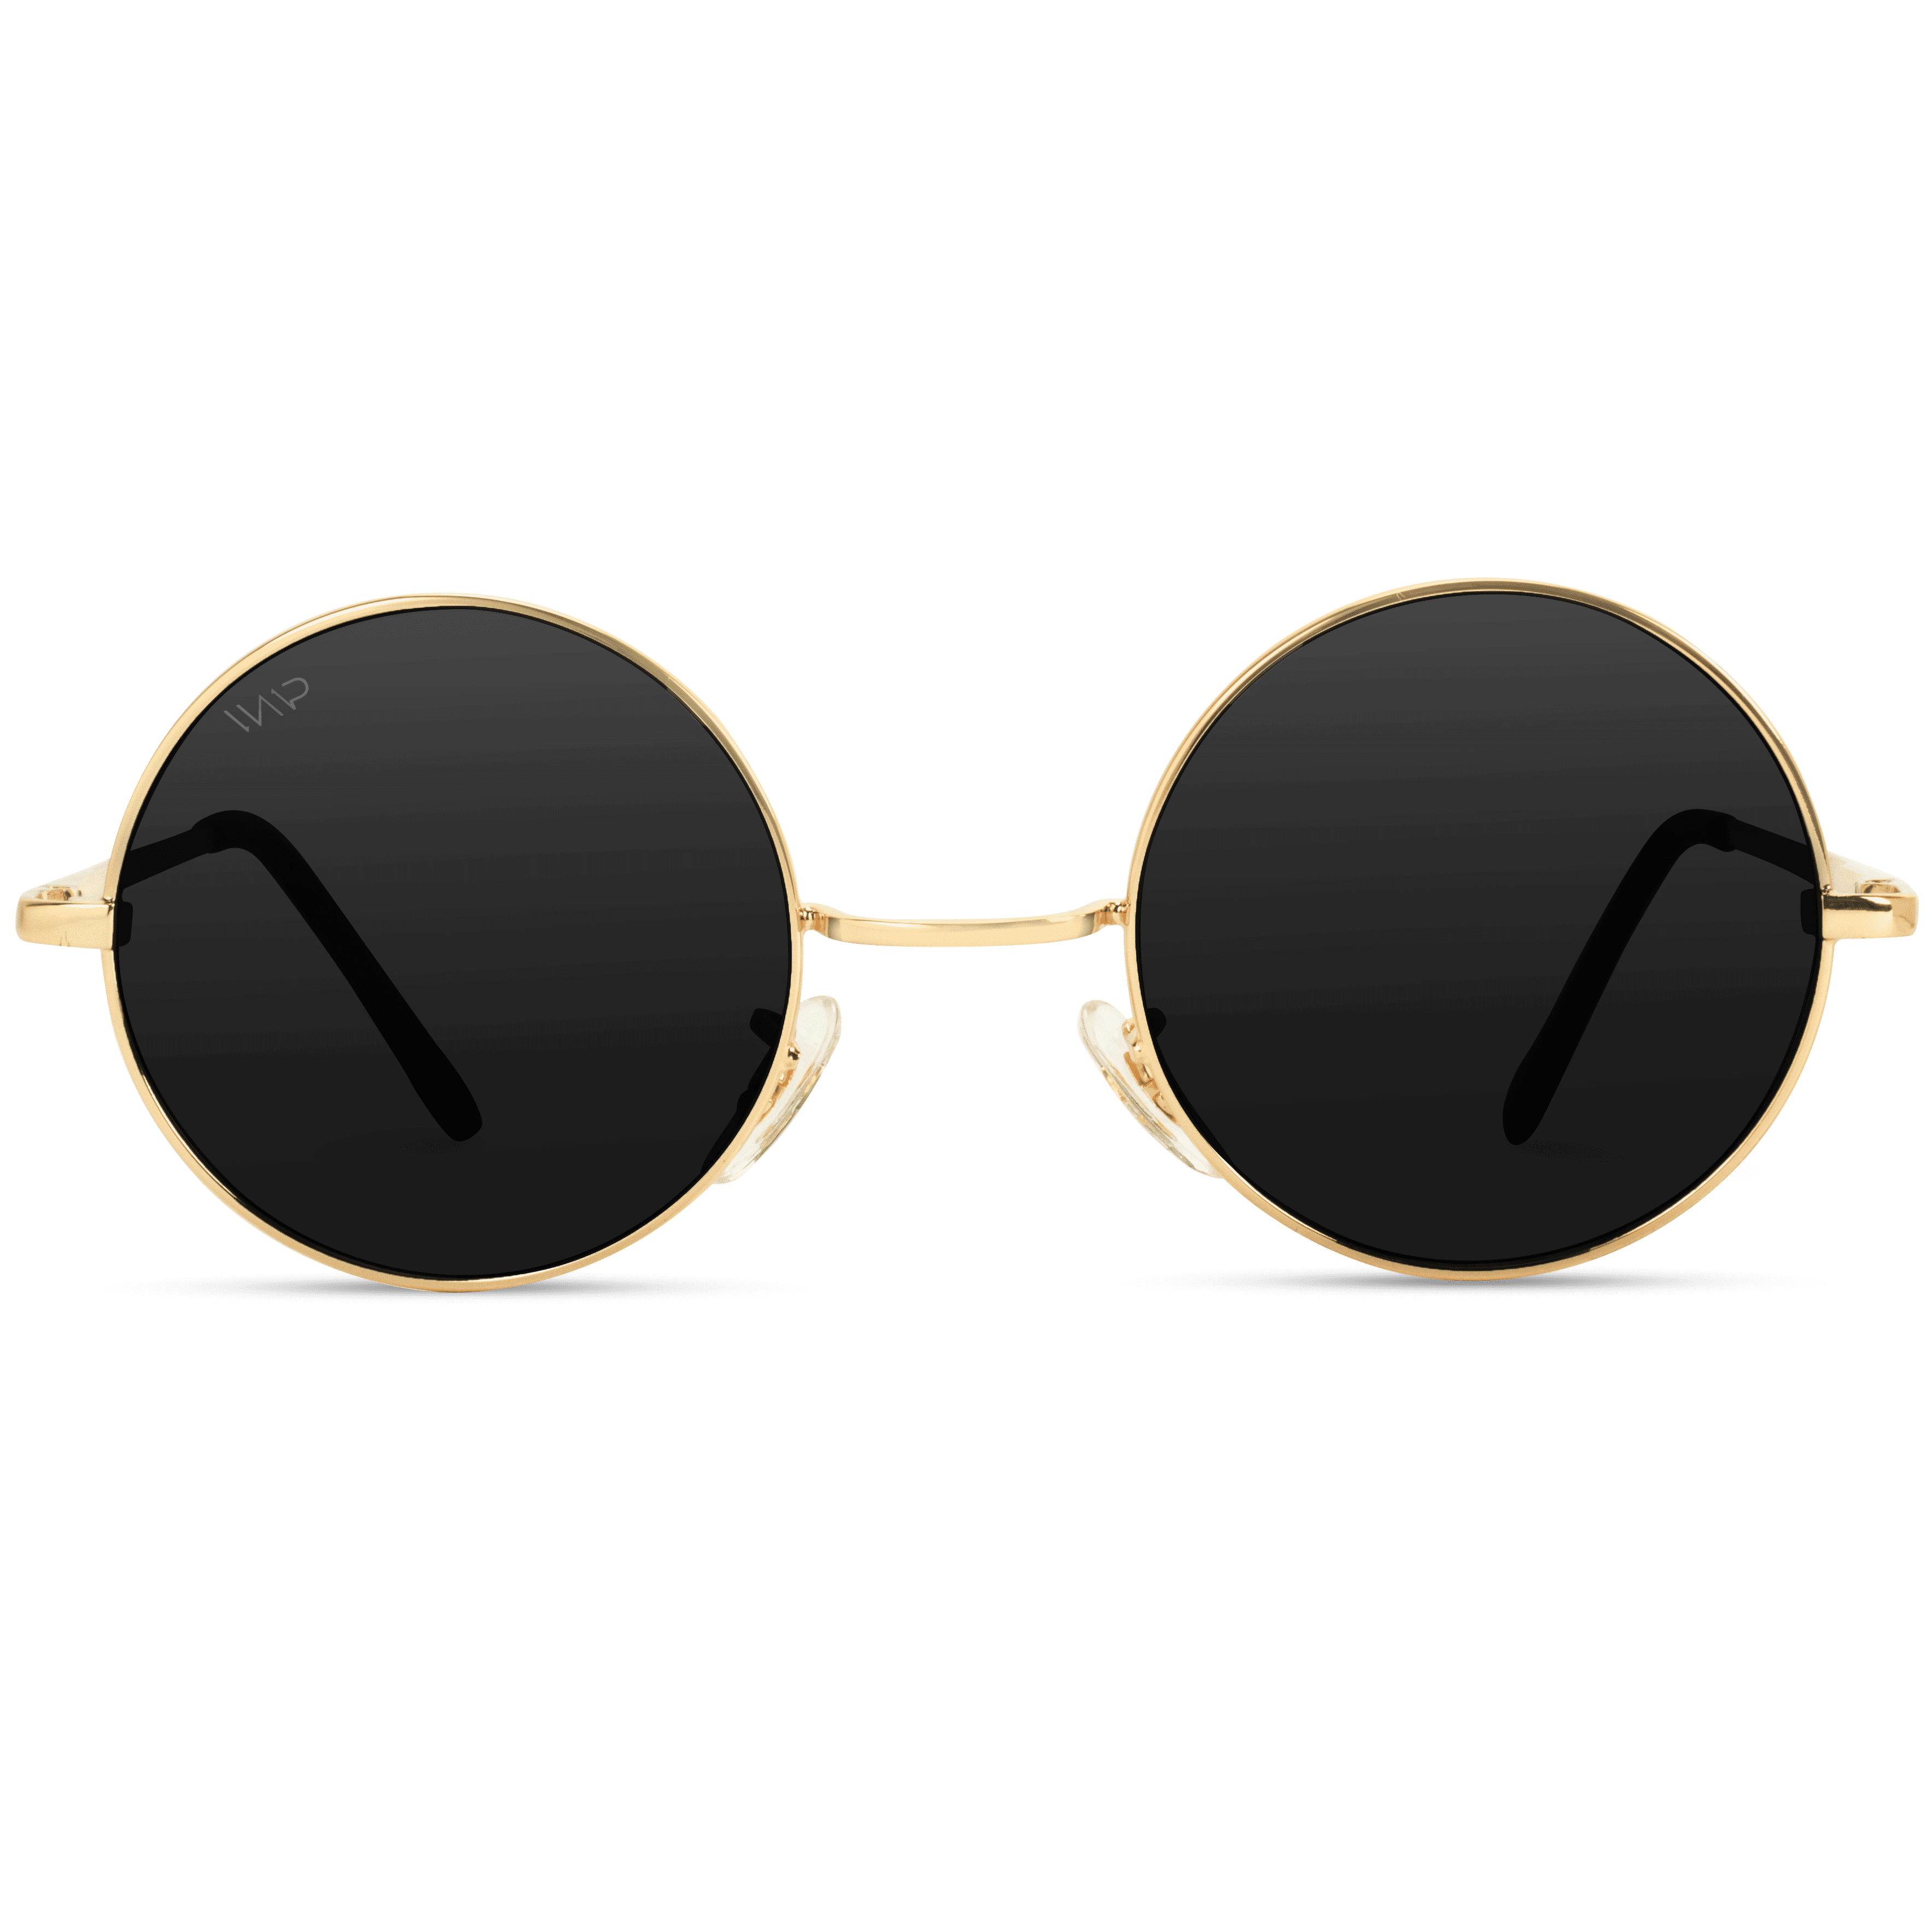 Super Flat Lens Sunglasses Round Circle Thin Metal Frame Eyewear Clothing Shoes And Accessories 